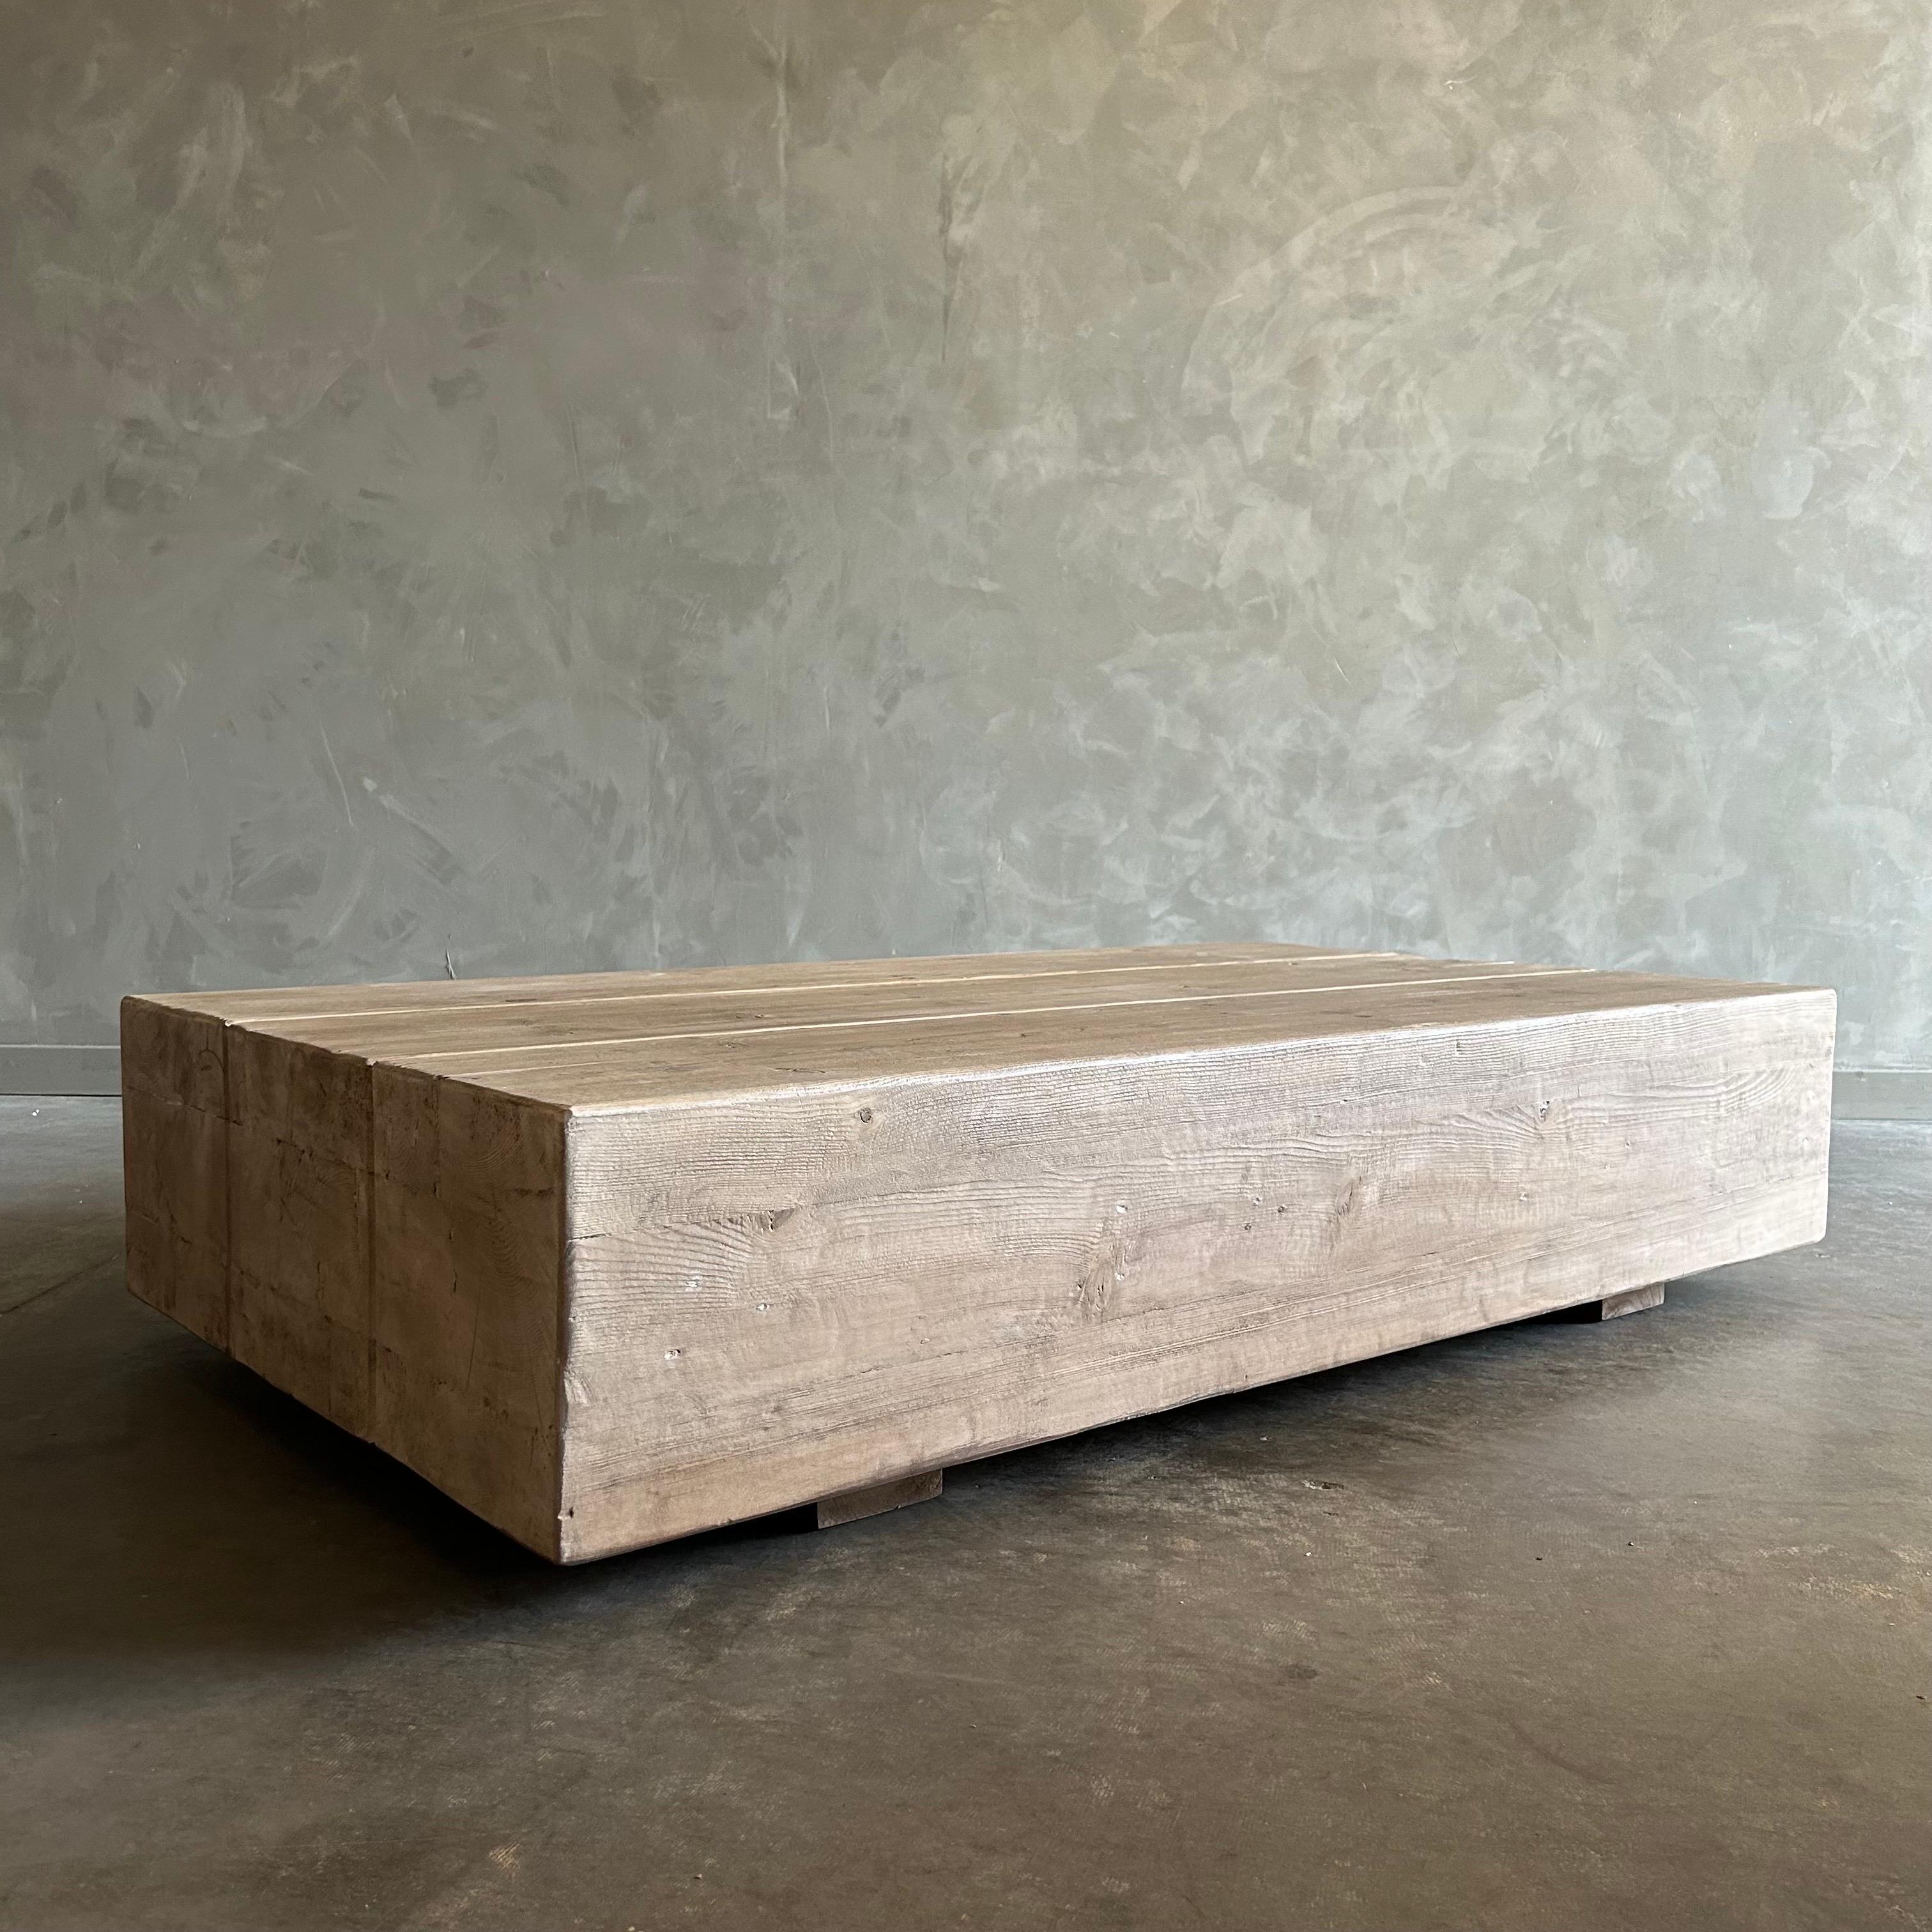 BH COLLECTION
One of a kind Elm Wood Beam Coffee Table
This table is a modern minimalist's dream, it is an elegant piece that will grow with you throughout time. Made of elm wood planks, the table's finish highlights the natural grain and beauty of